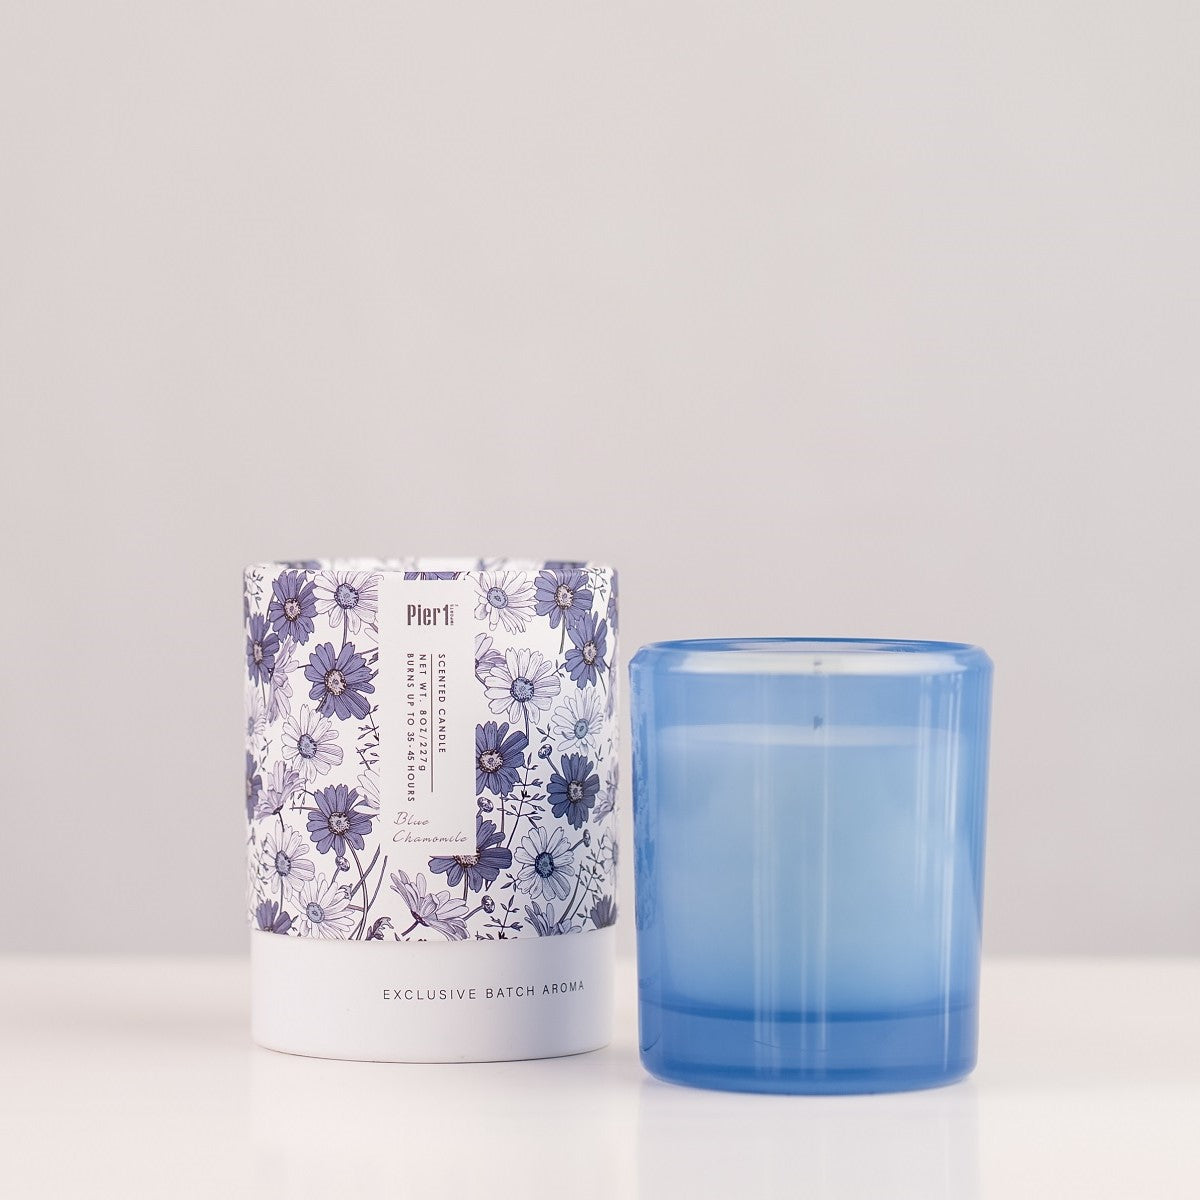 Pier-1-Blue-Chamomile-8oz-Boxed-Soy-Candle-Candles